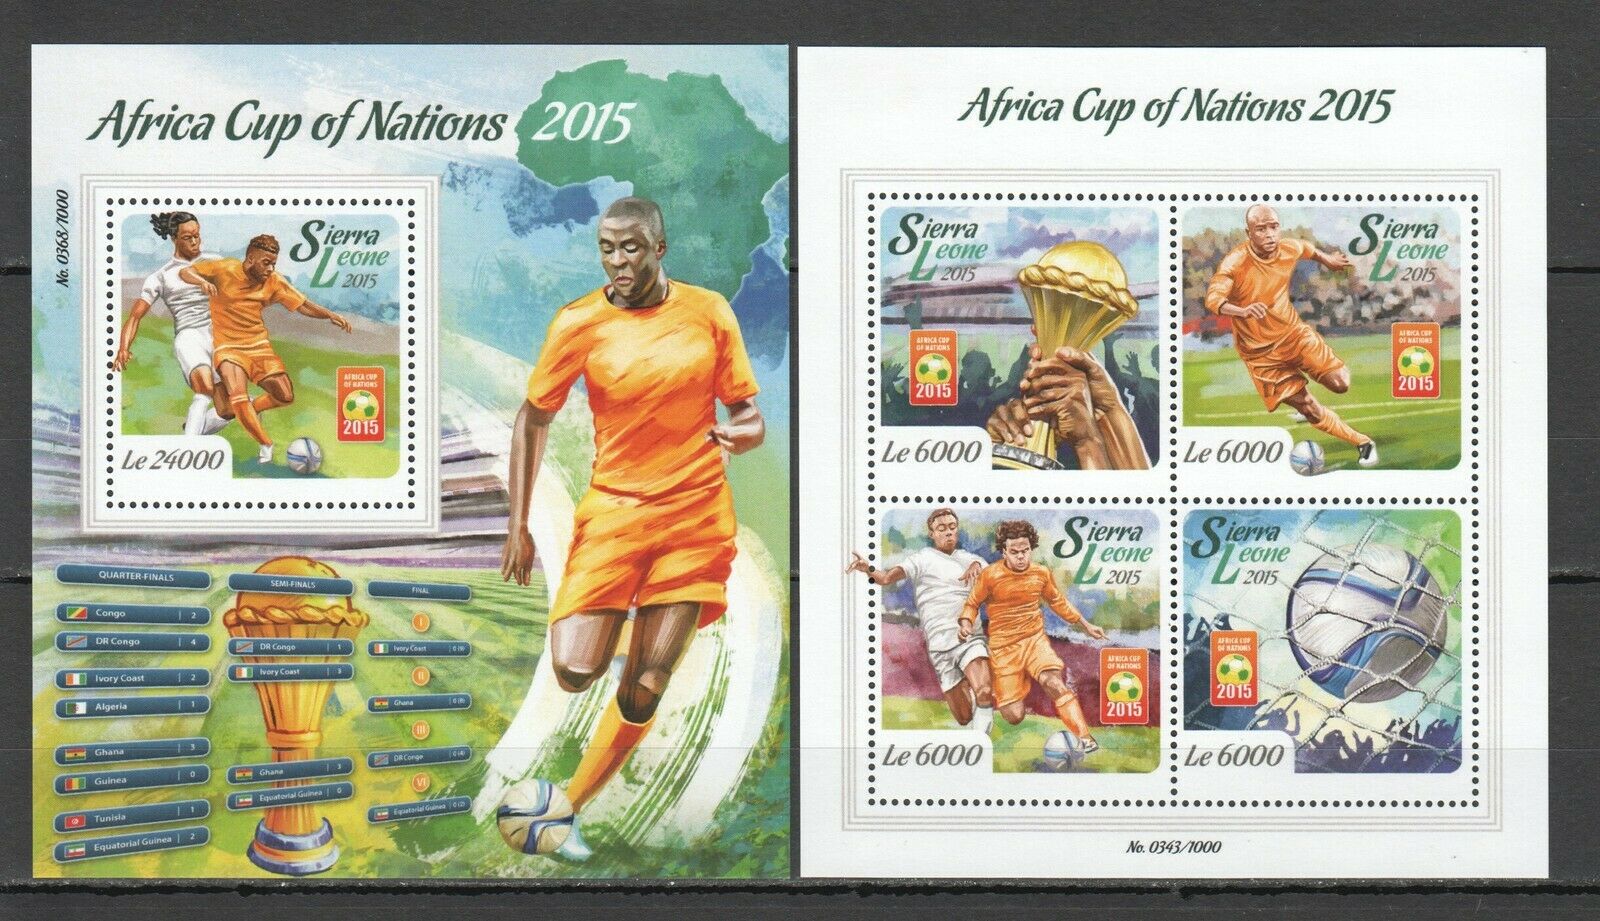 St525 2015 Sierra Leone Sport Football Africa Cup Of Nations 1kb+1bl Mnh Stamps